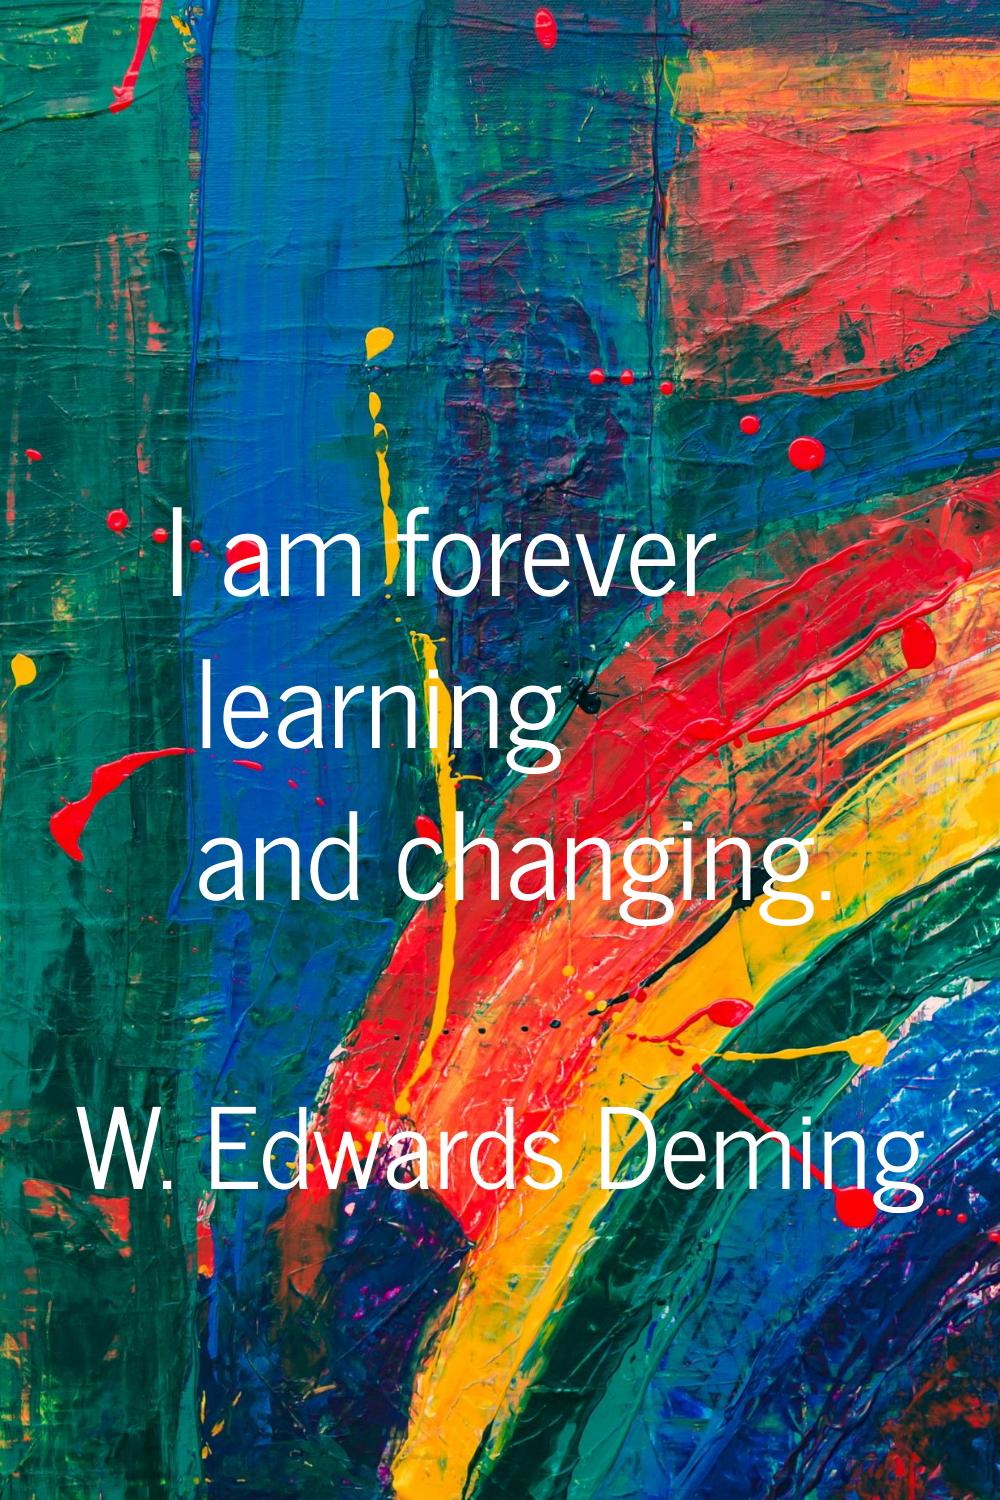 I am forever learning and changing.